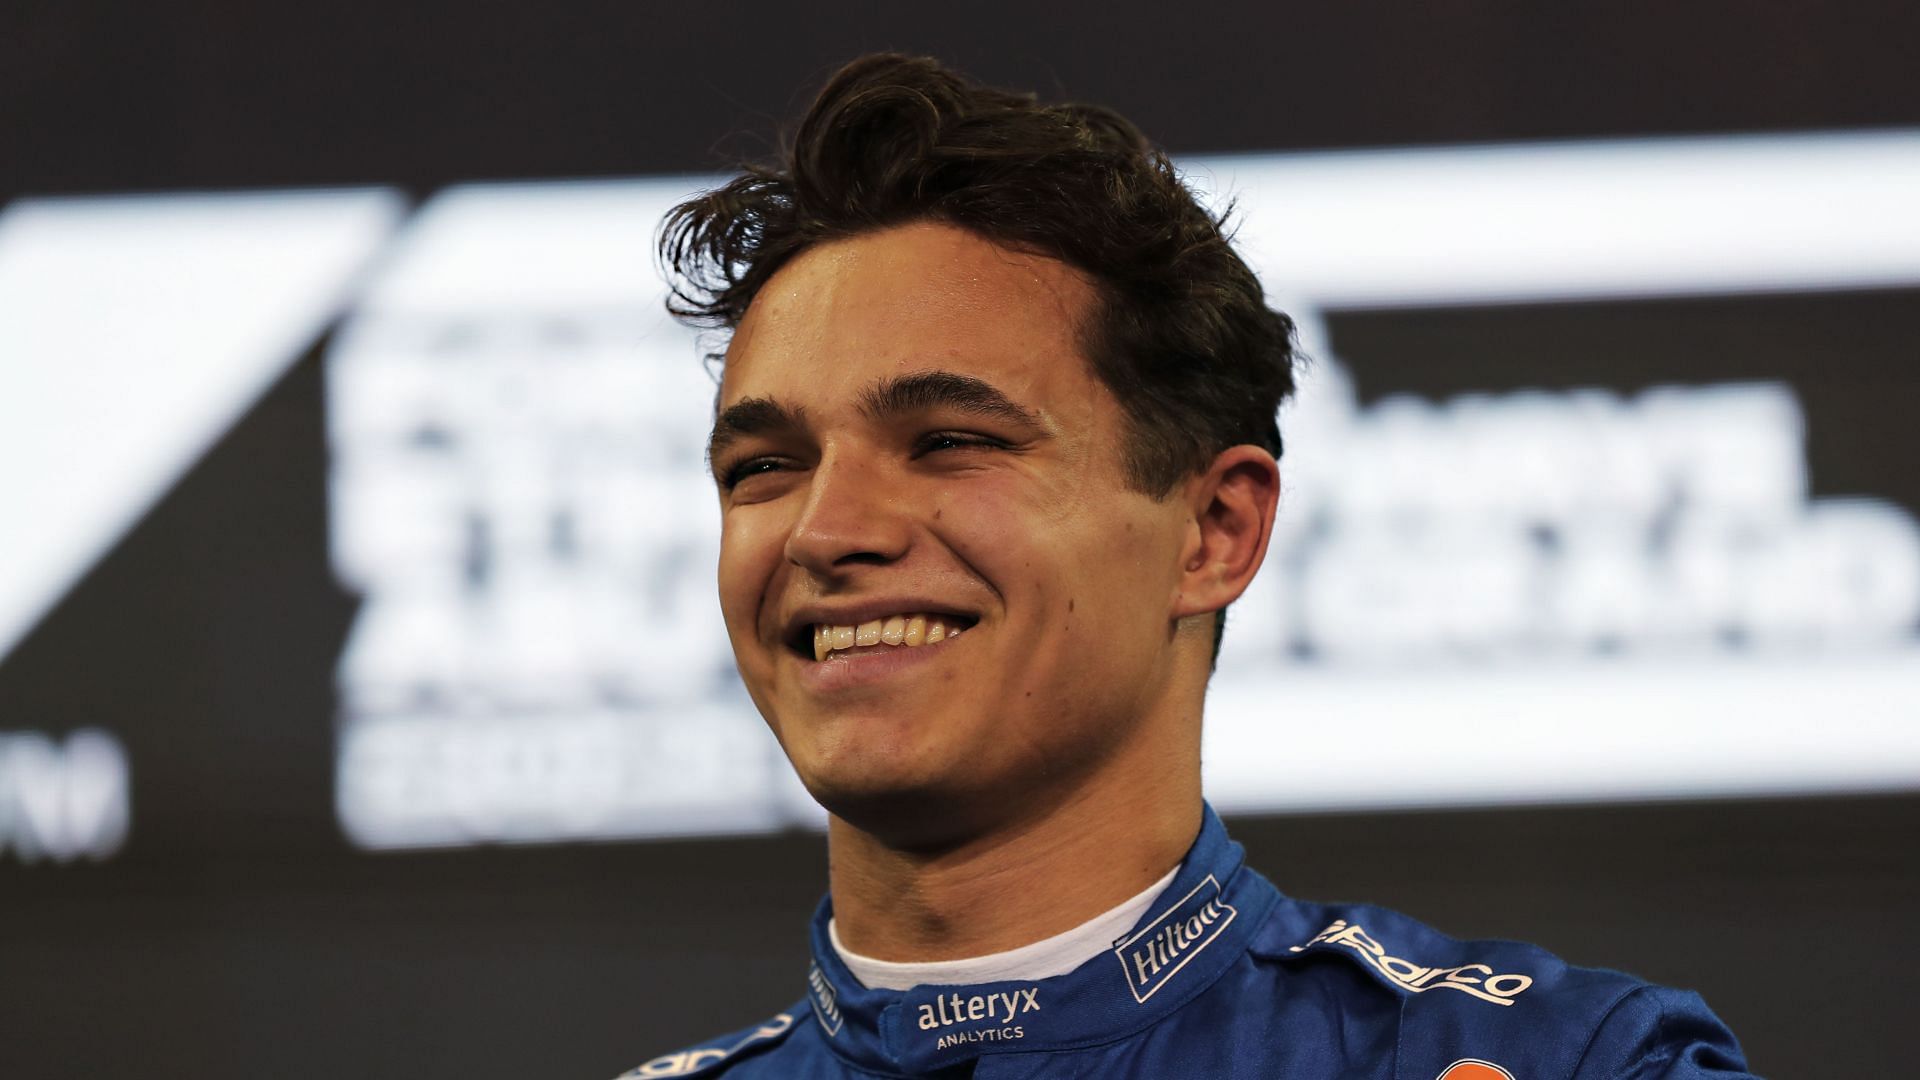 F1 Grand Prix of Abu Dhabi - Lando Norris after the qualifying session